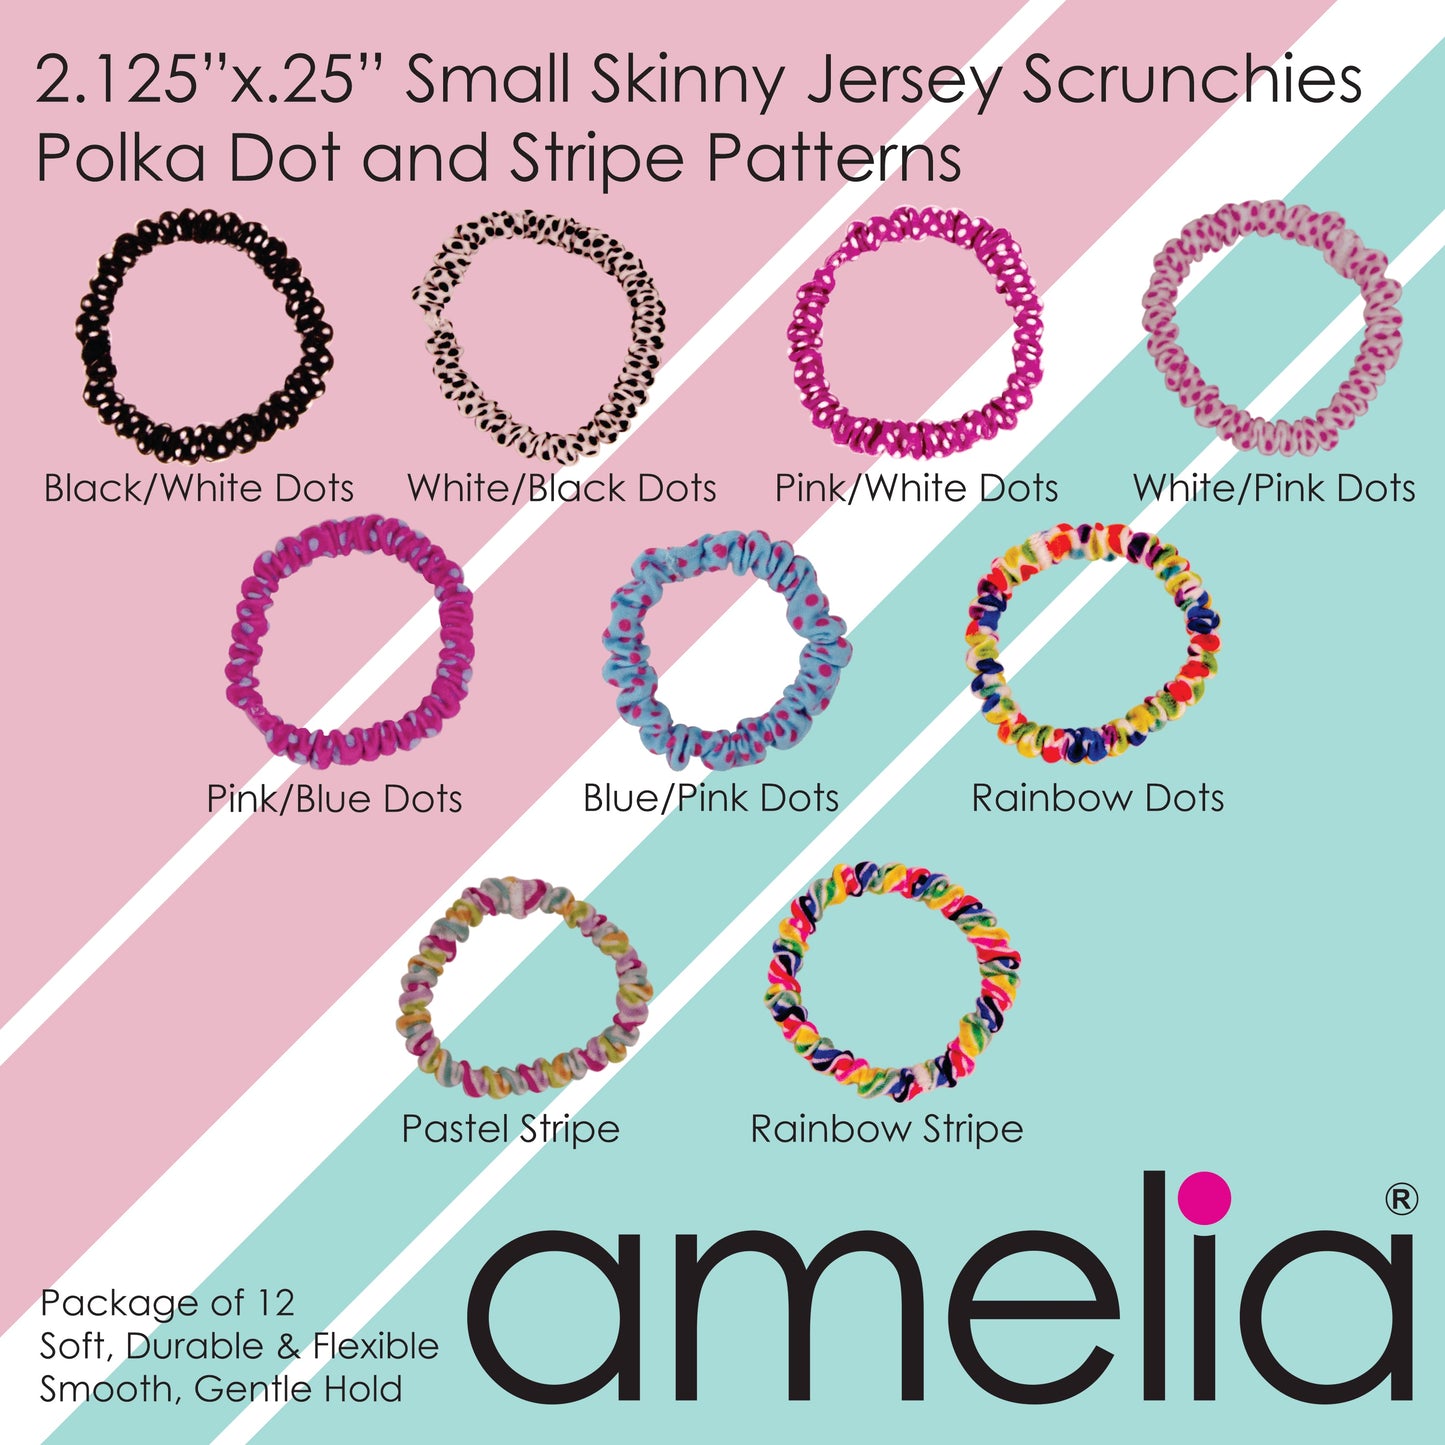 Amelia Beauty, Brown Skinny Jersey Scrunchies, 2.125in Diameter, Gentle on Hair, Strong Hold, No Snag, No Dents or Creases. 12 Pack